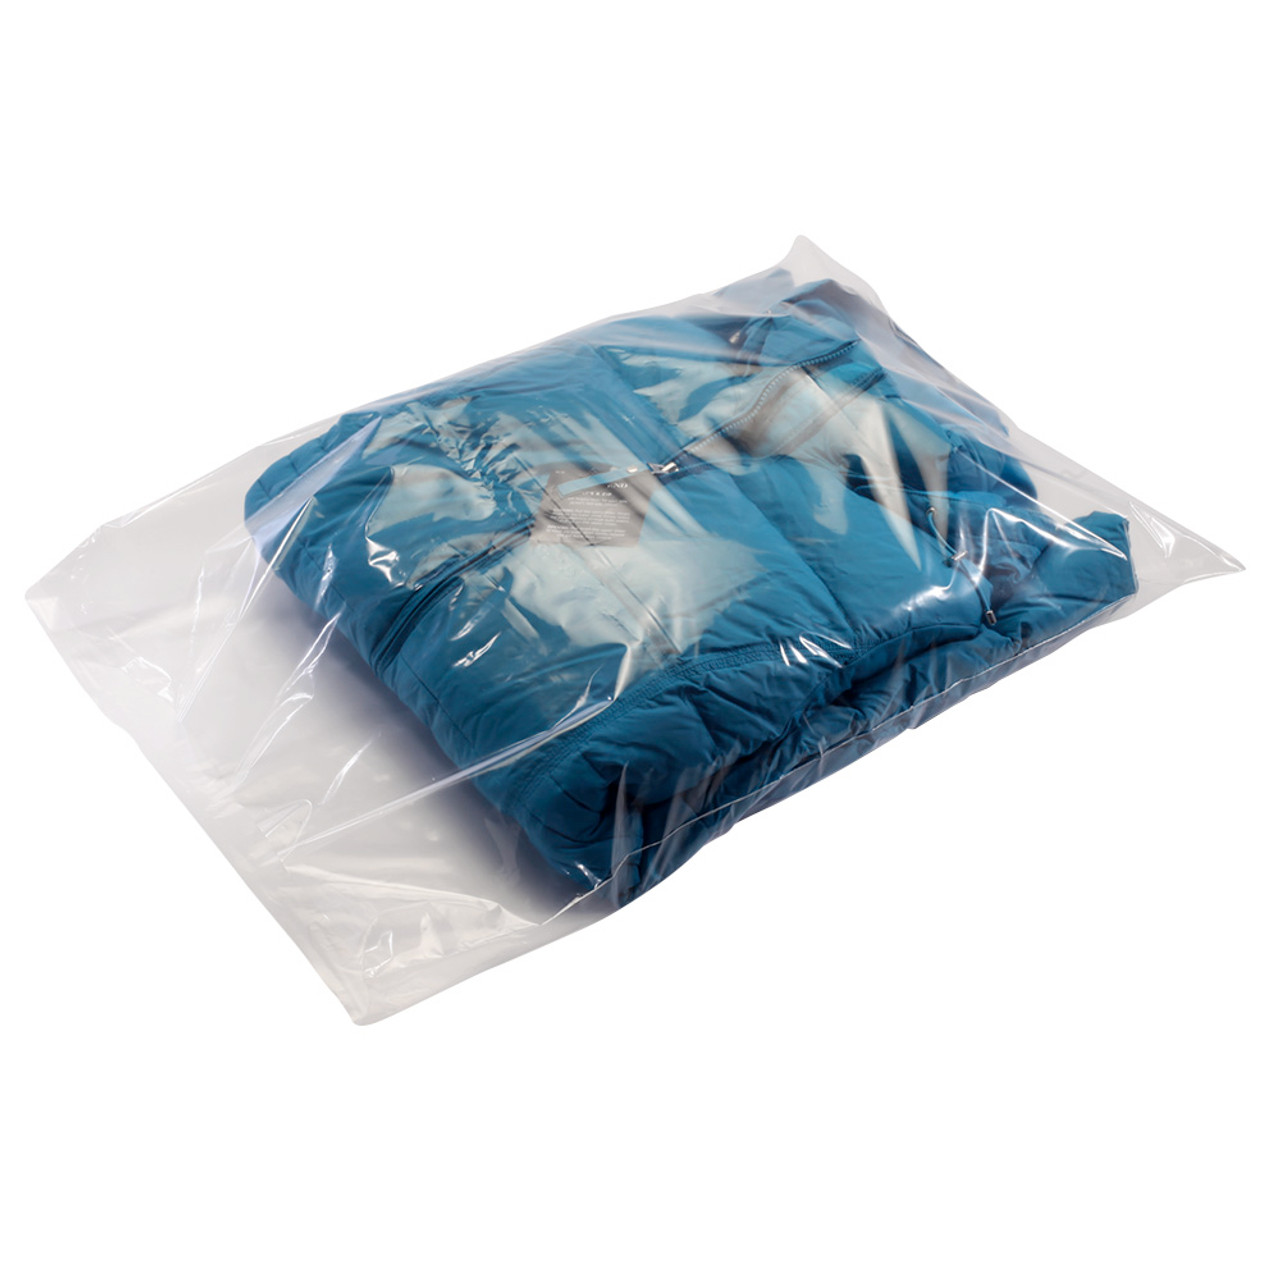 5X12 - 1.5 mil - clear - layflat poly bags - 1000 bags/case